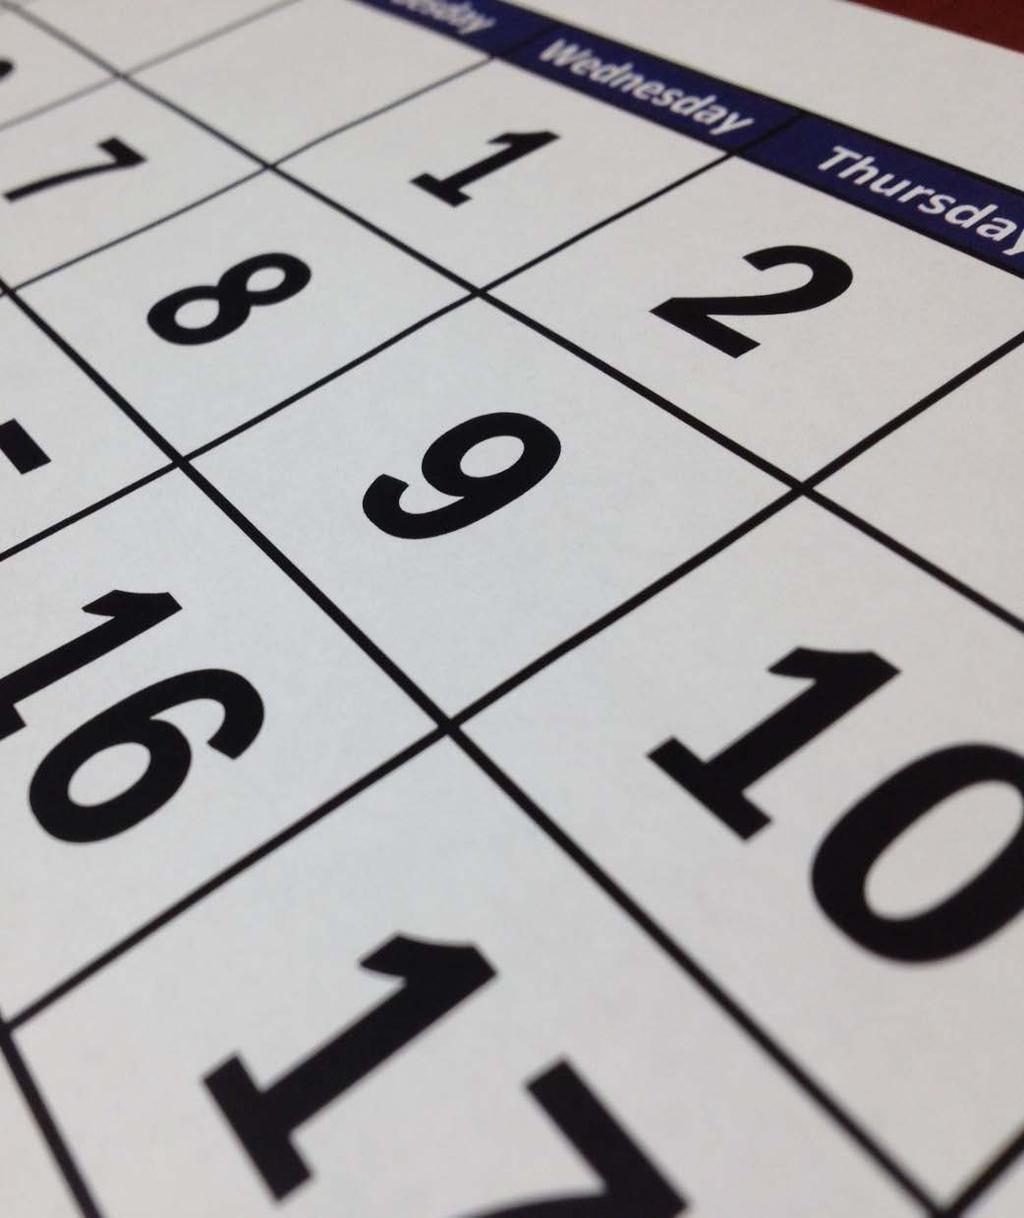 ESTABLISHING A CONTENT CALENDAR WILL SERVE TO GUIDE THE MESSAGING OF YOUR SOCIAL MEDIA.